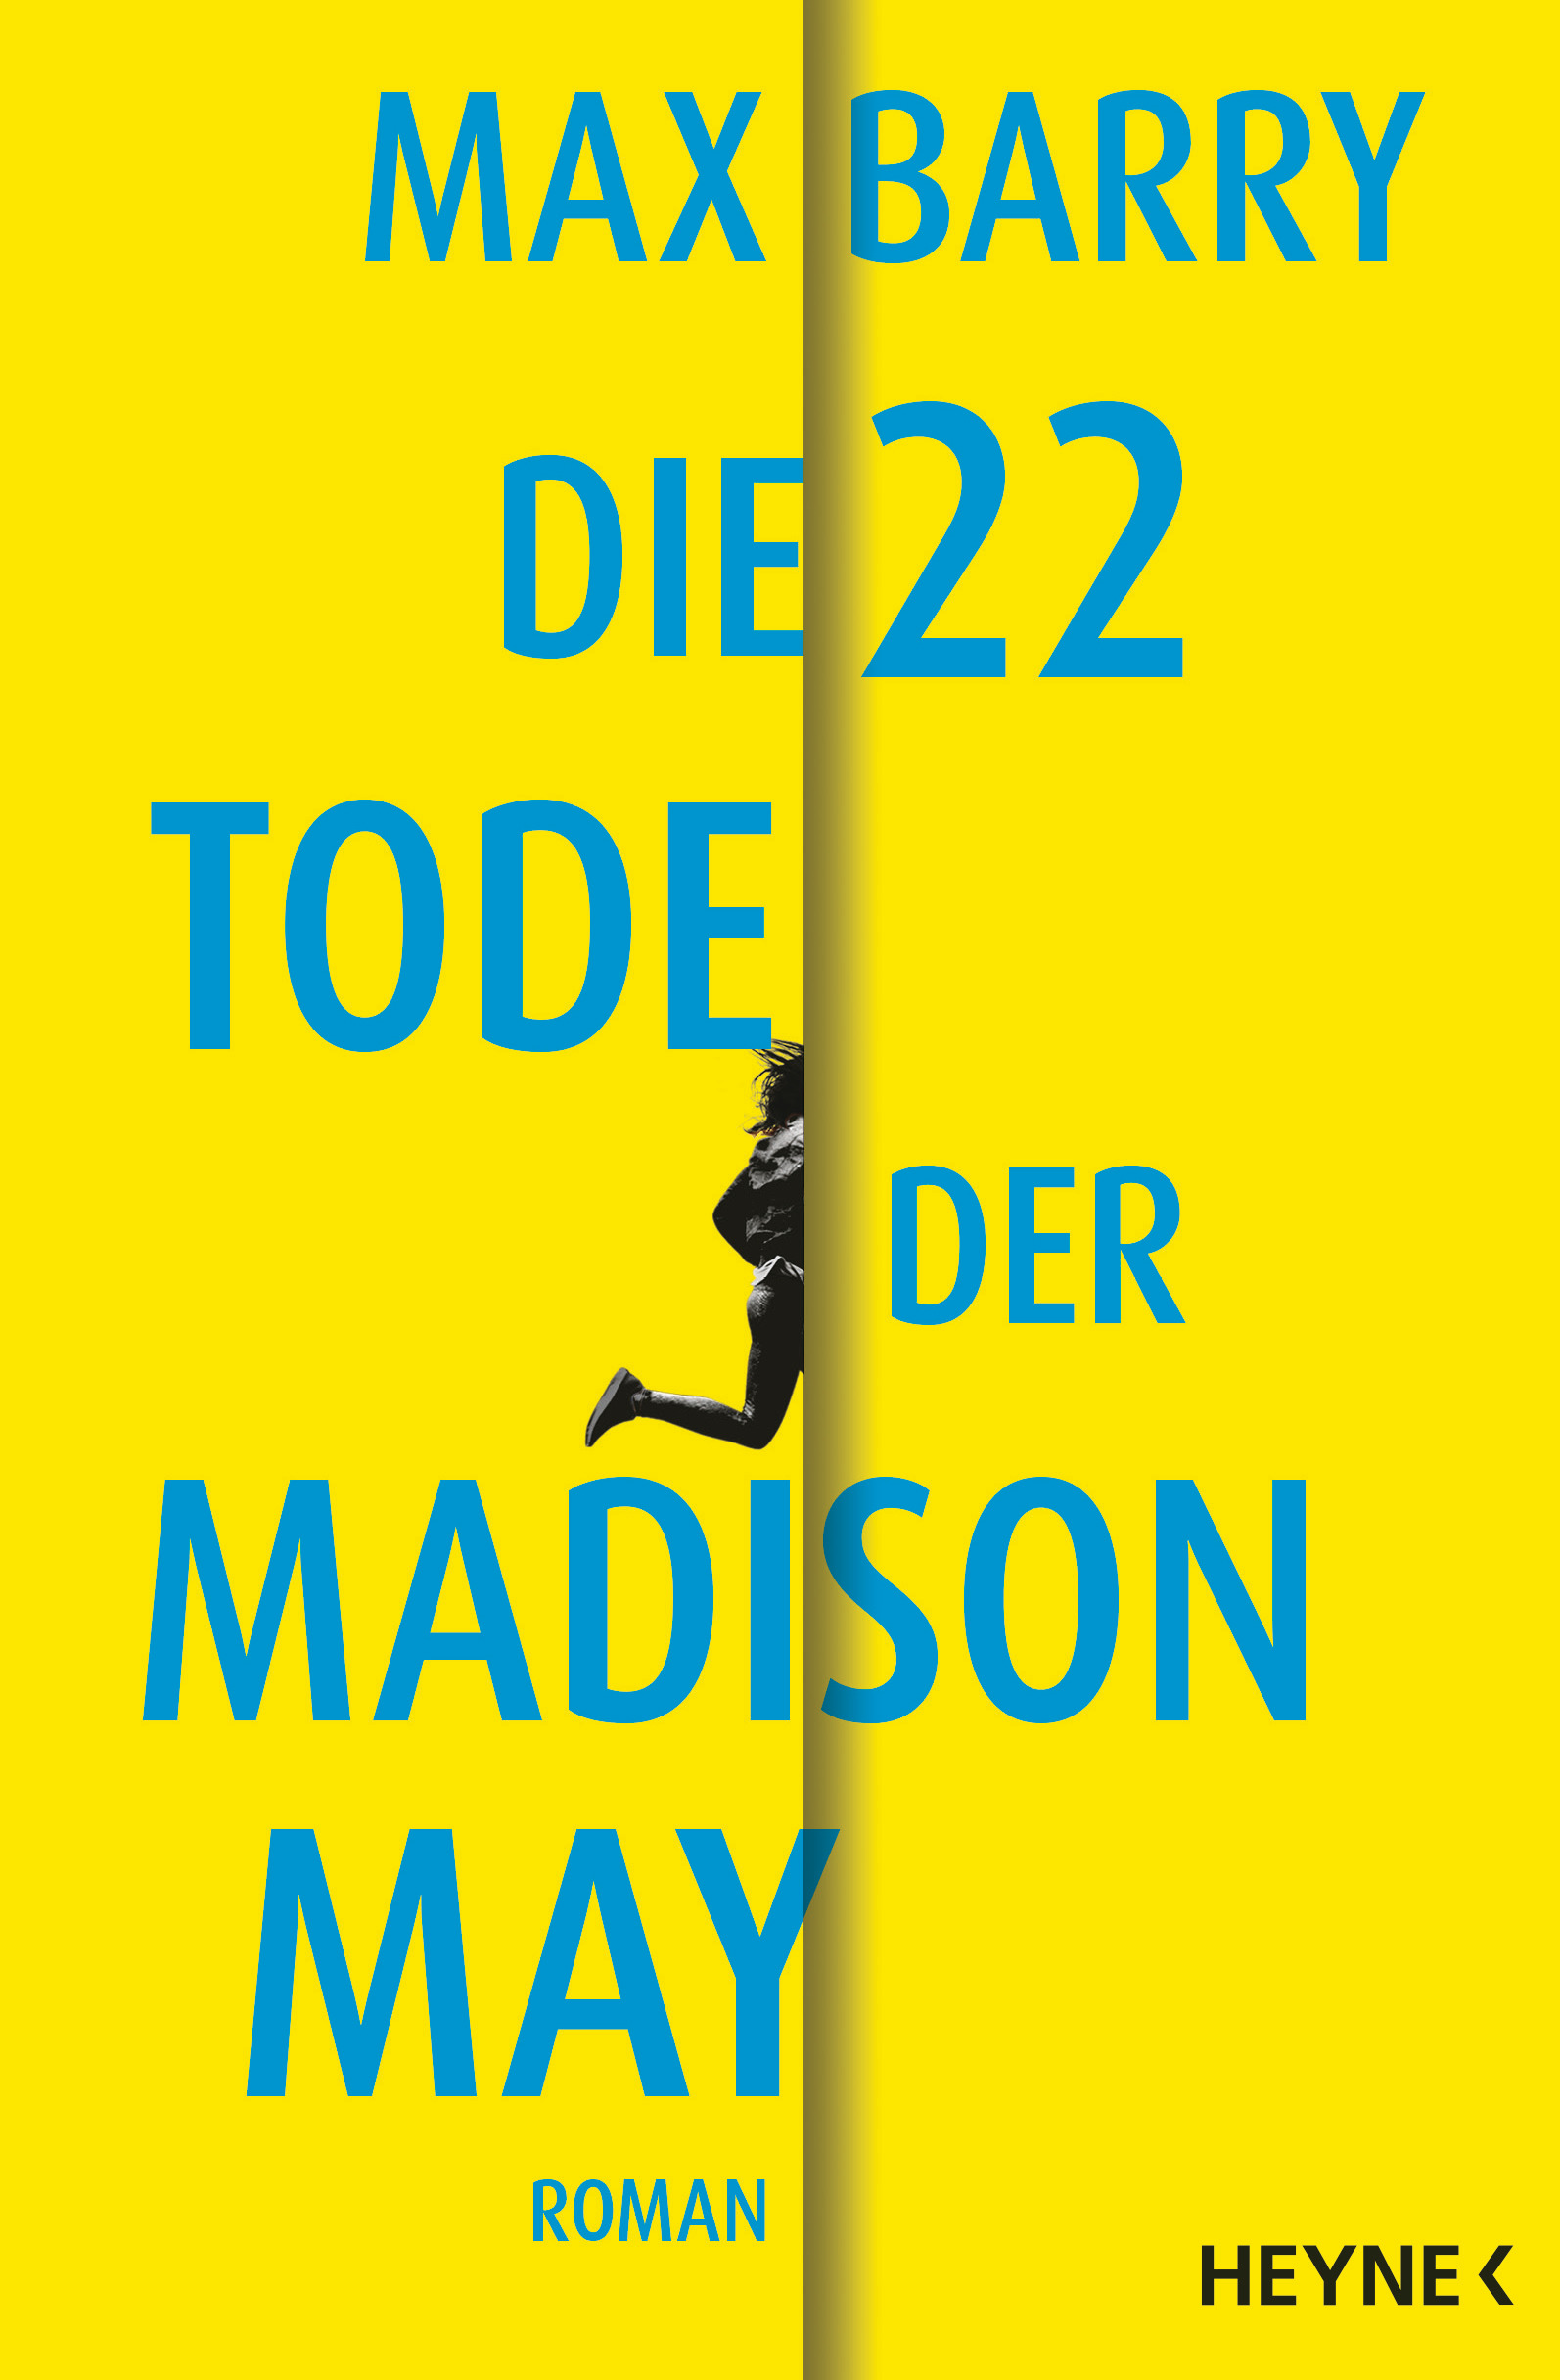 Max Barry: Die 22 Tode der Madison May